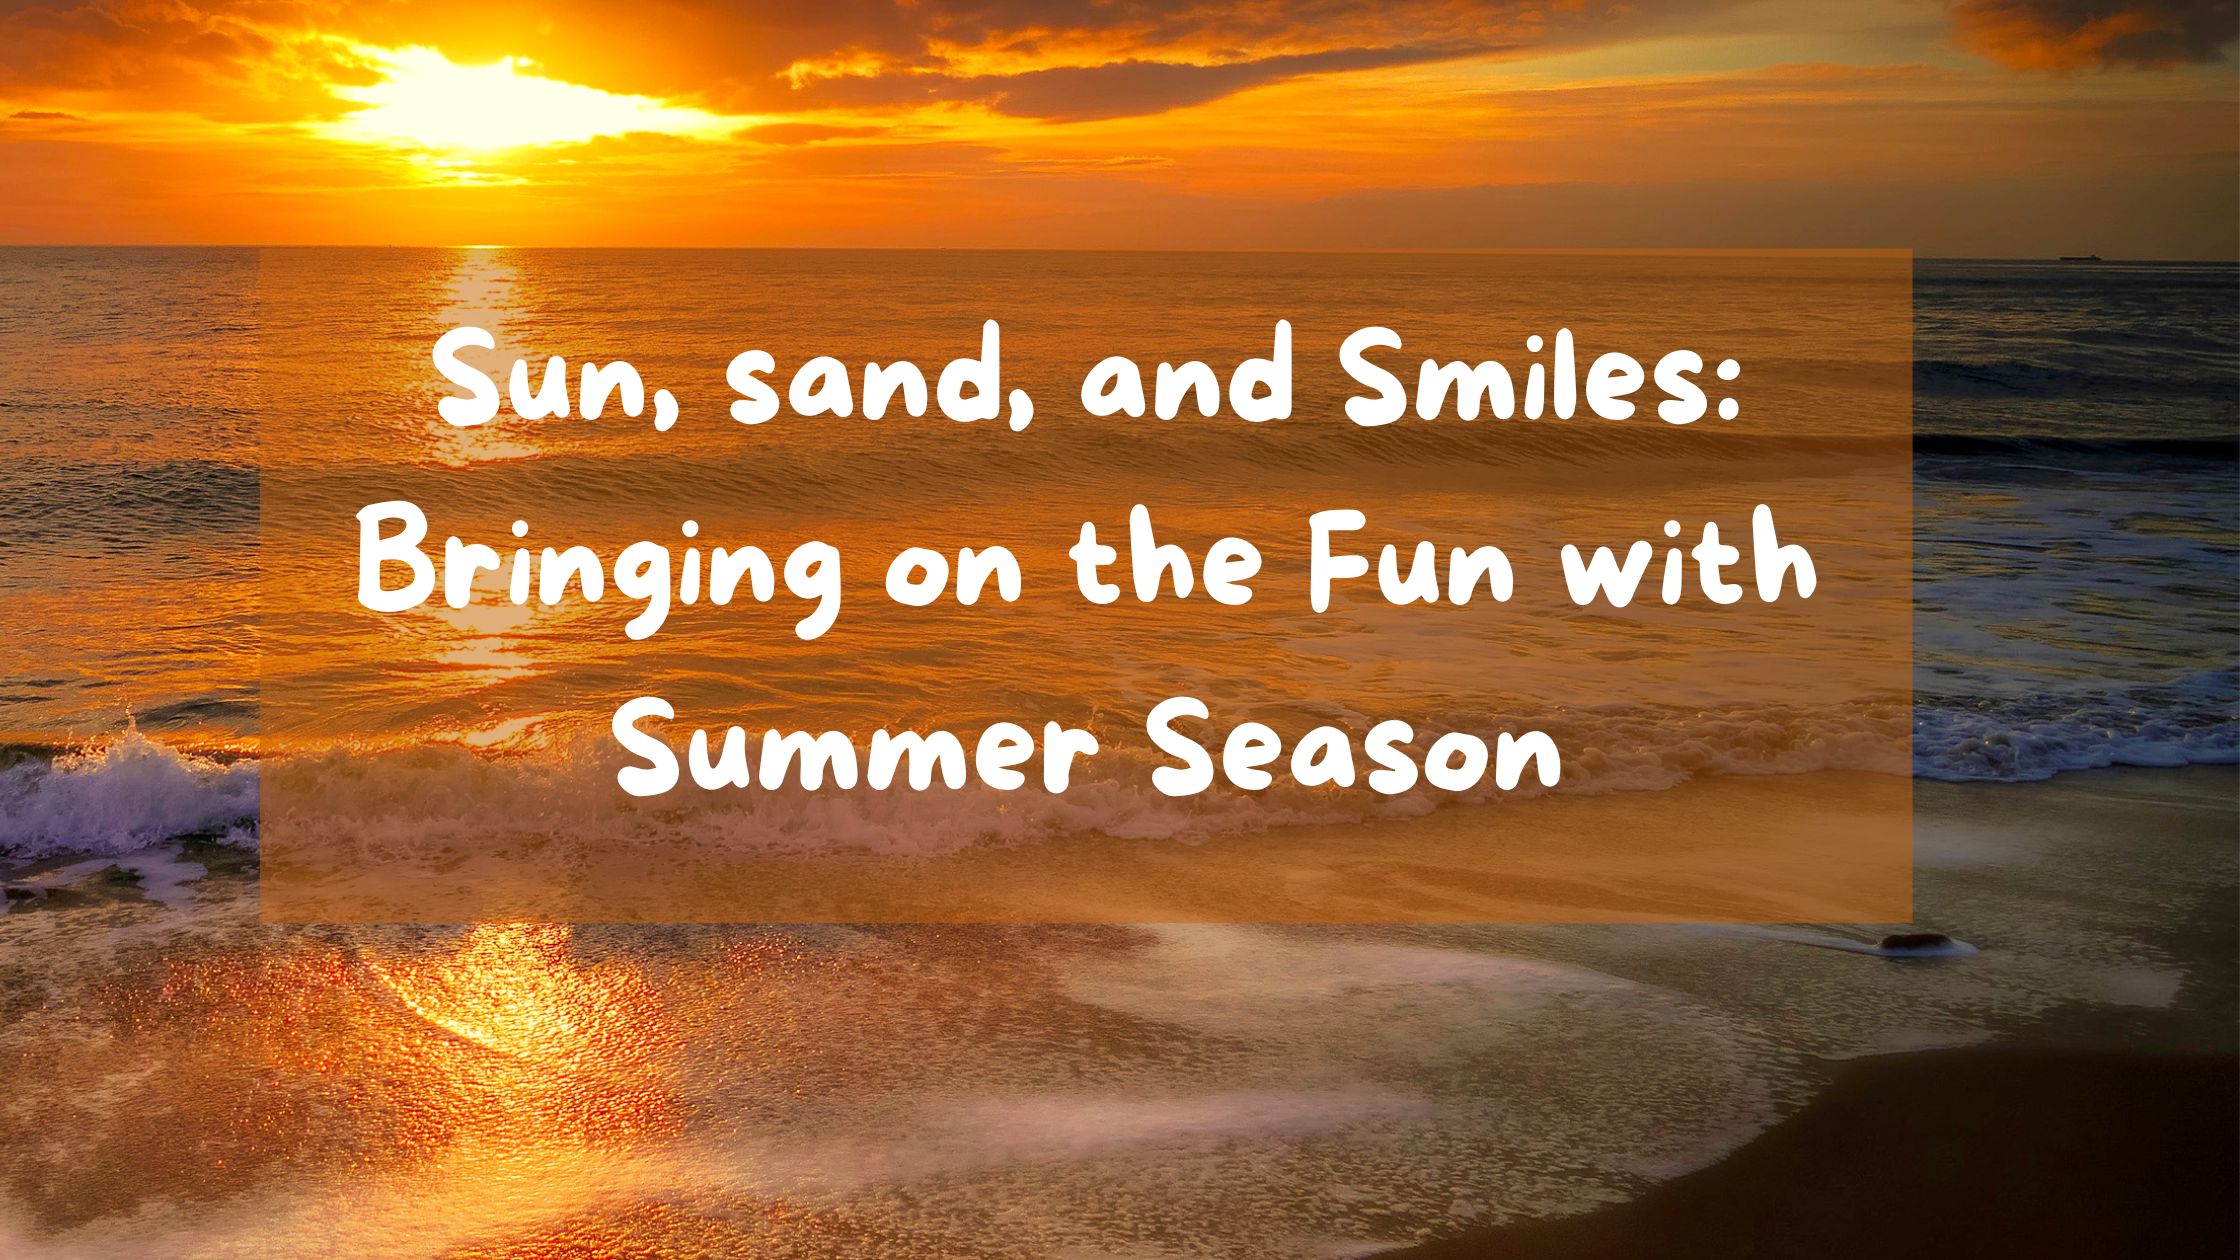 Sun, sand, and Smiles: Bringing on the Fun with Summer Season